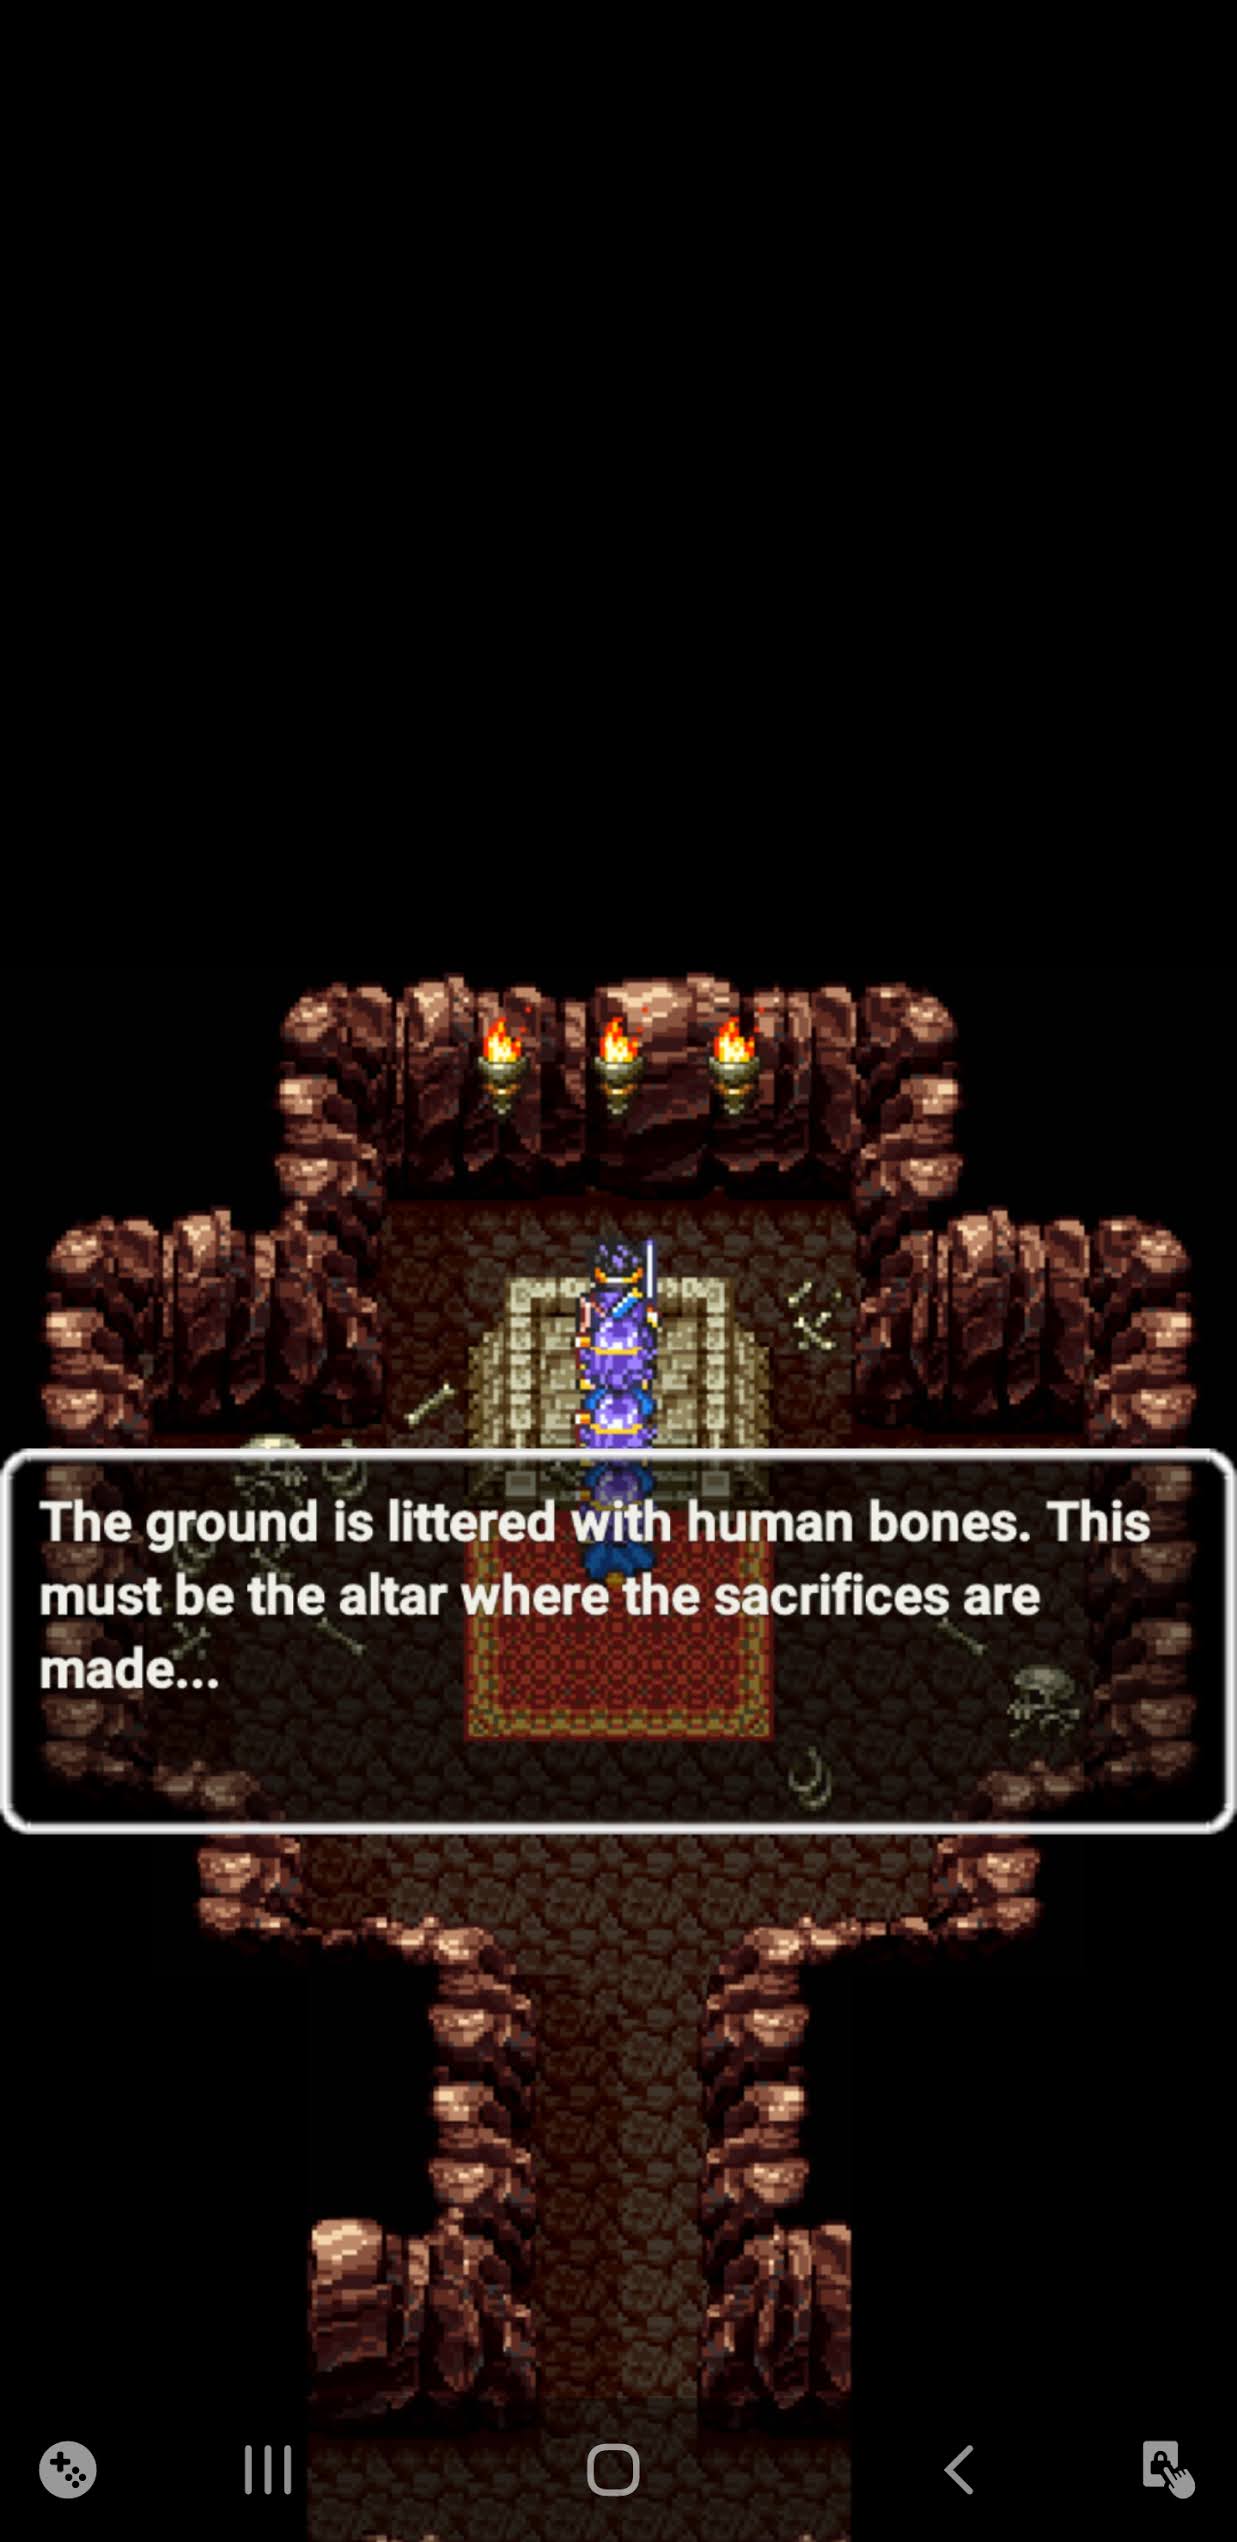 Review: Dragon Quest III - The Seeds of Salvation » Old Game Hermit